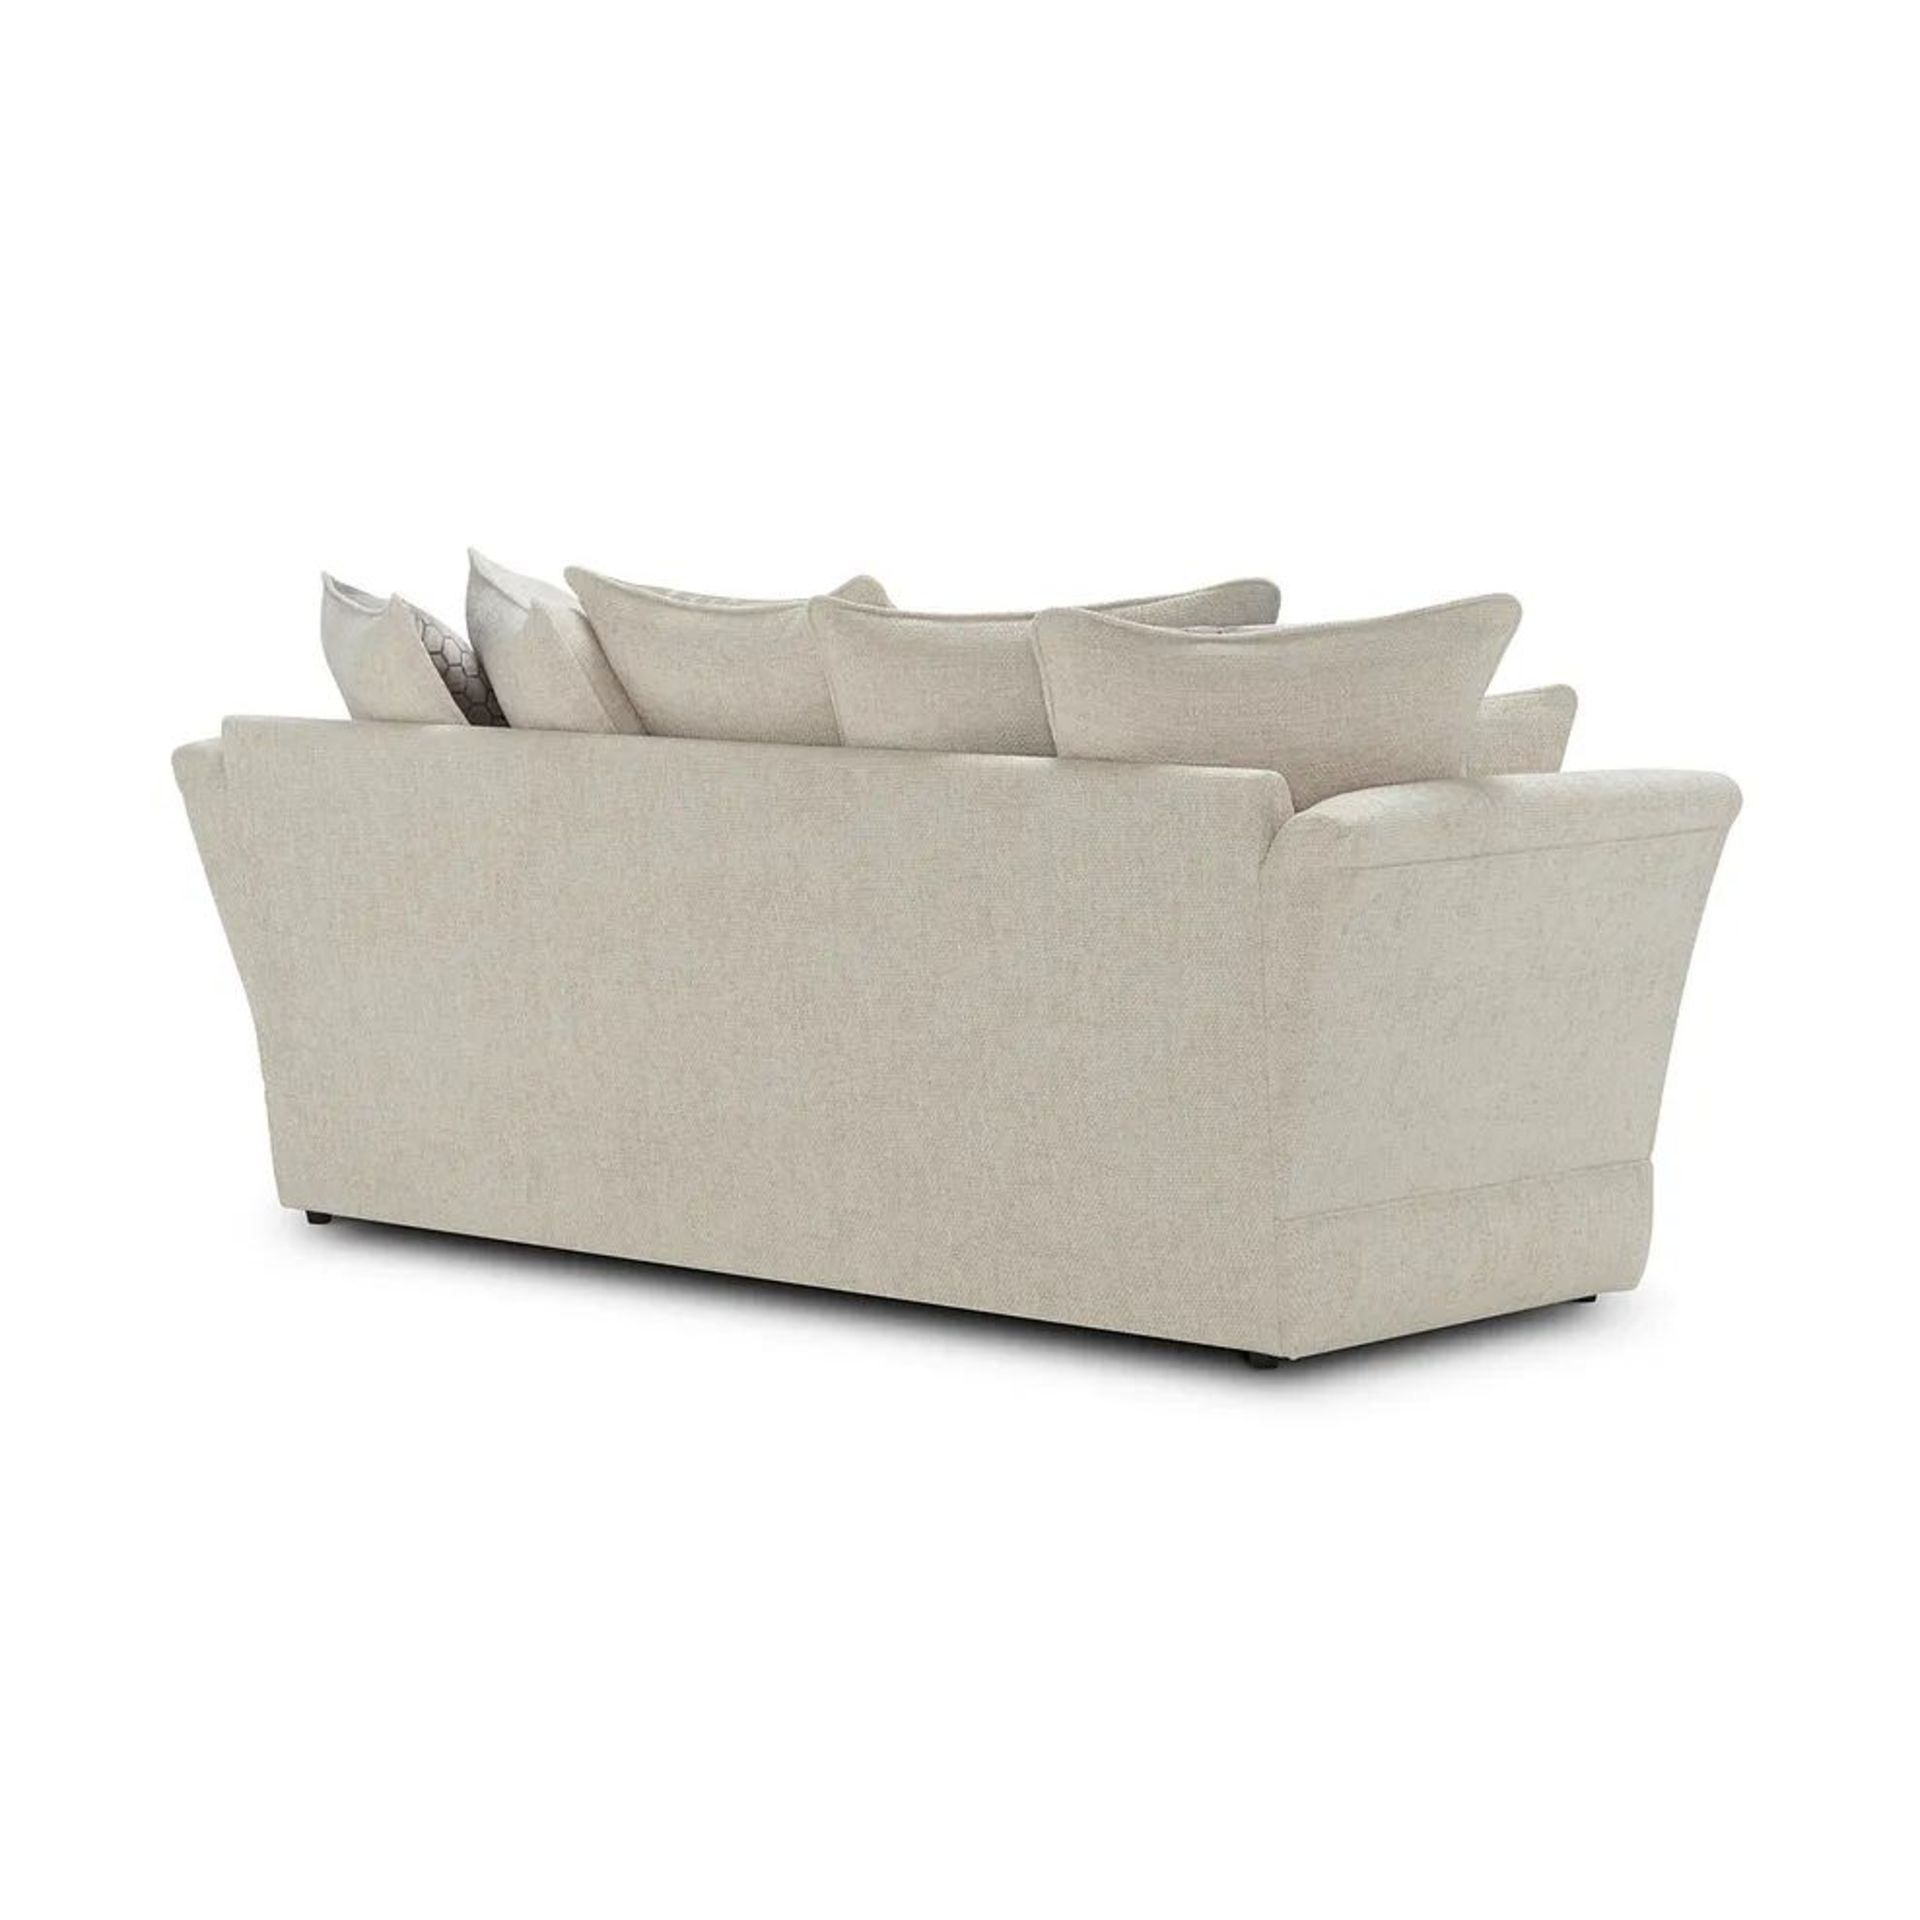 BRAND NEW CARRINGTON 3 Seater Pillow Back Sofa - NATURAL FABRIC. RRP £1099. Make our 3-seater pillow - Image 3 of 8